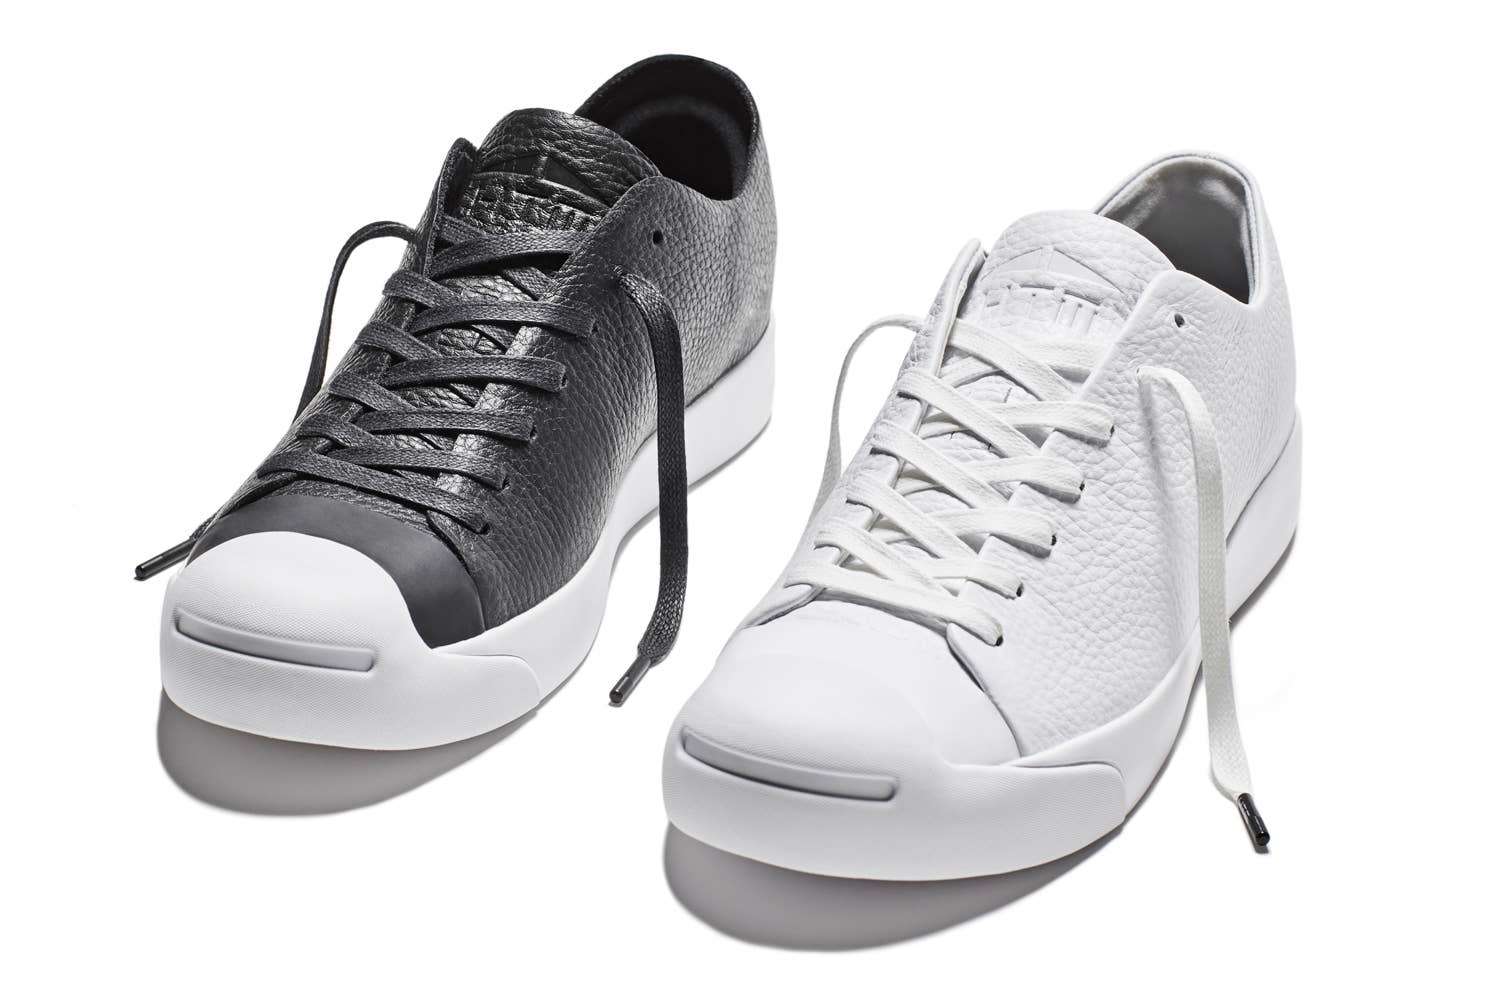 HTM Converse Jack Purcell